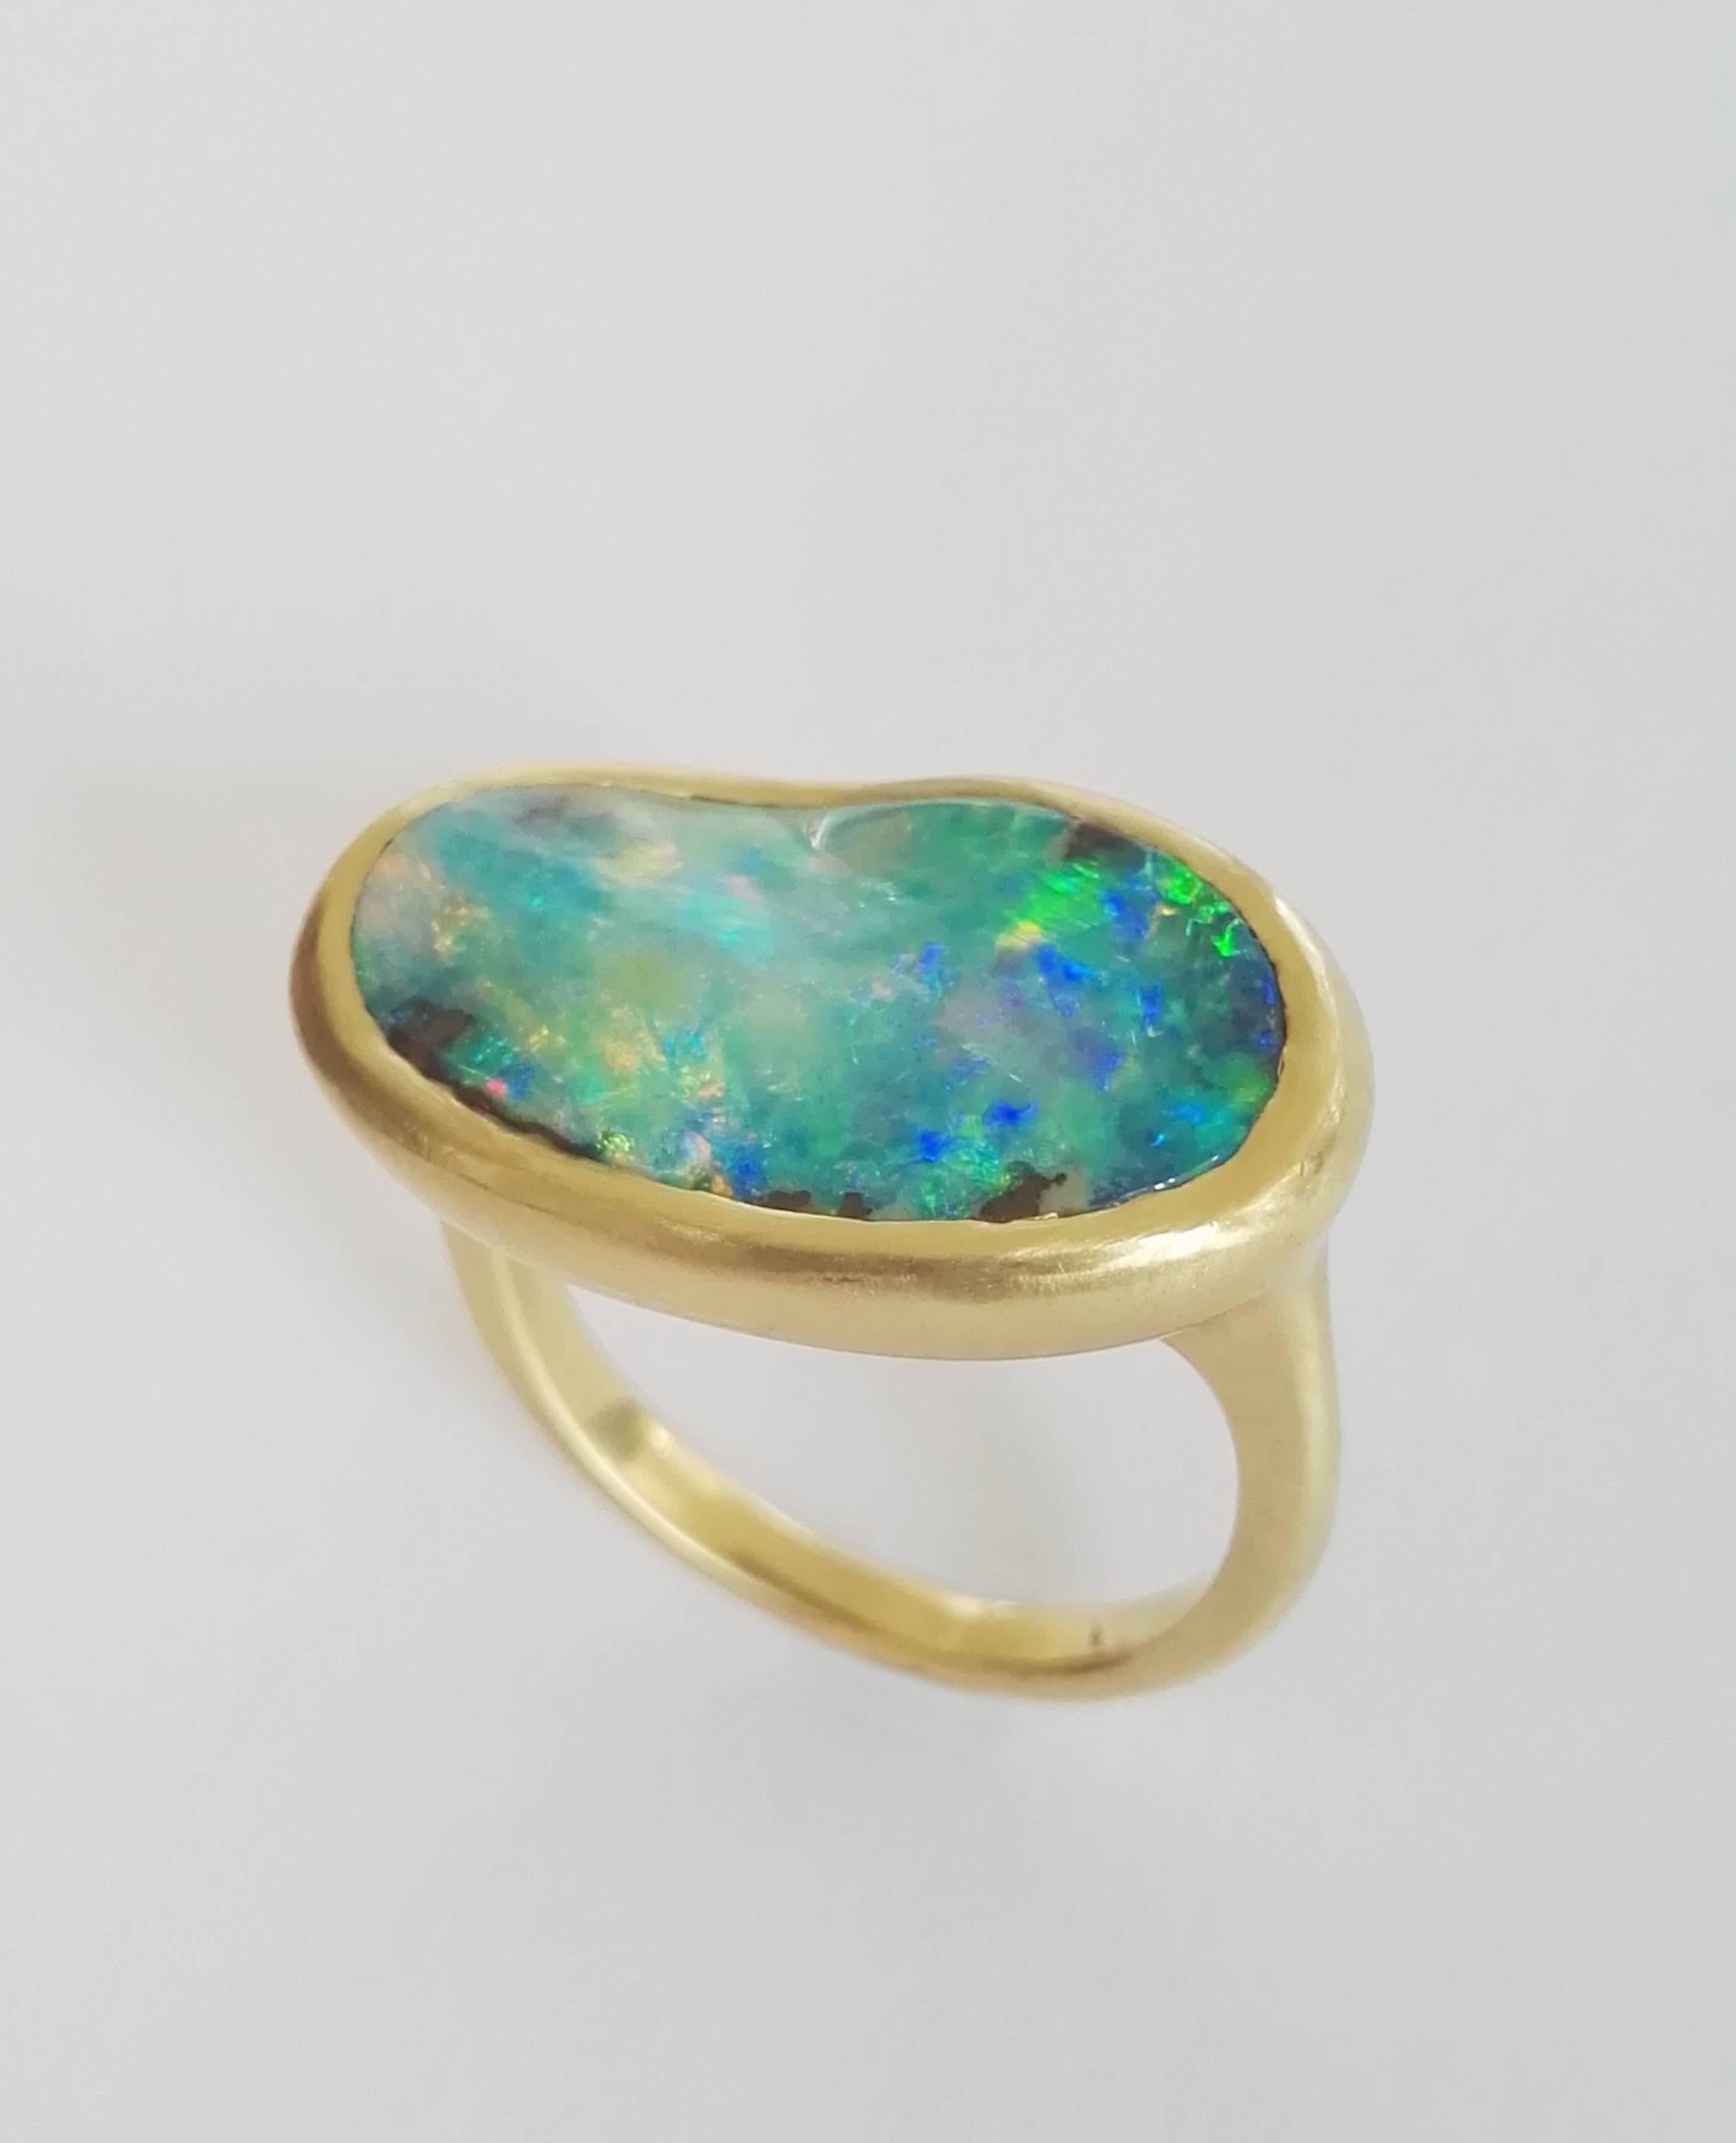 Dalben design One of a kind 18k yellow gold matte finishing ring with a 7,18 carat bezel-set magnificent Boulder Opal.
This Australian Bouder Opal seems the Sardinia sea.
Ring size 7 1/4 - EU 55 re-sizable to most finger sizes.
bezel setting